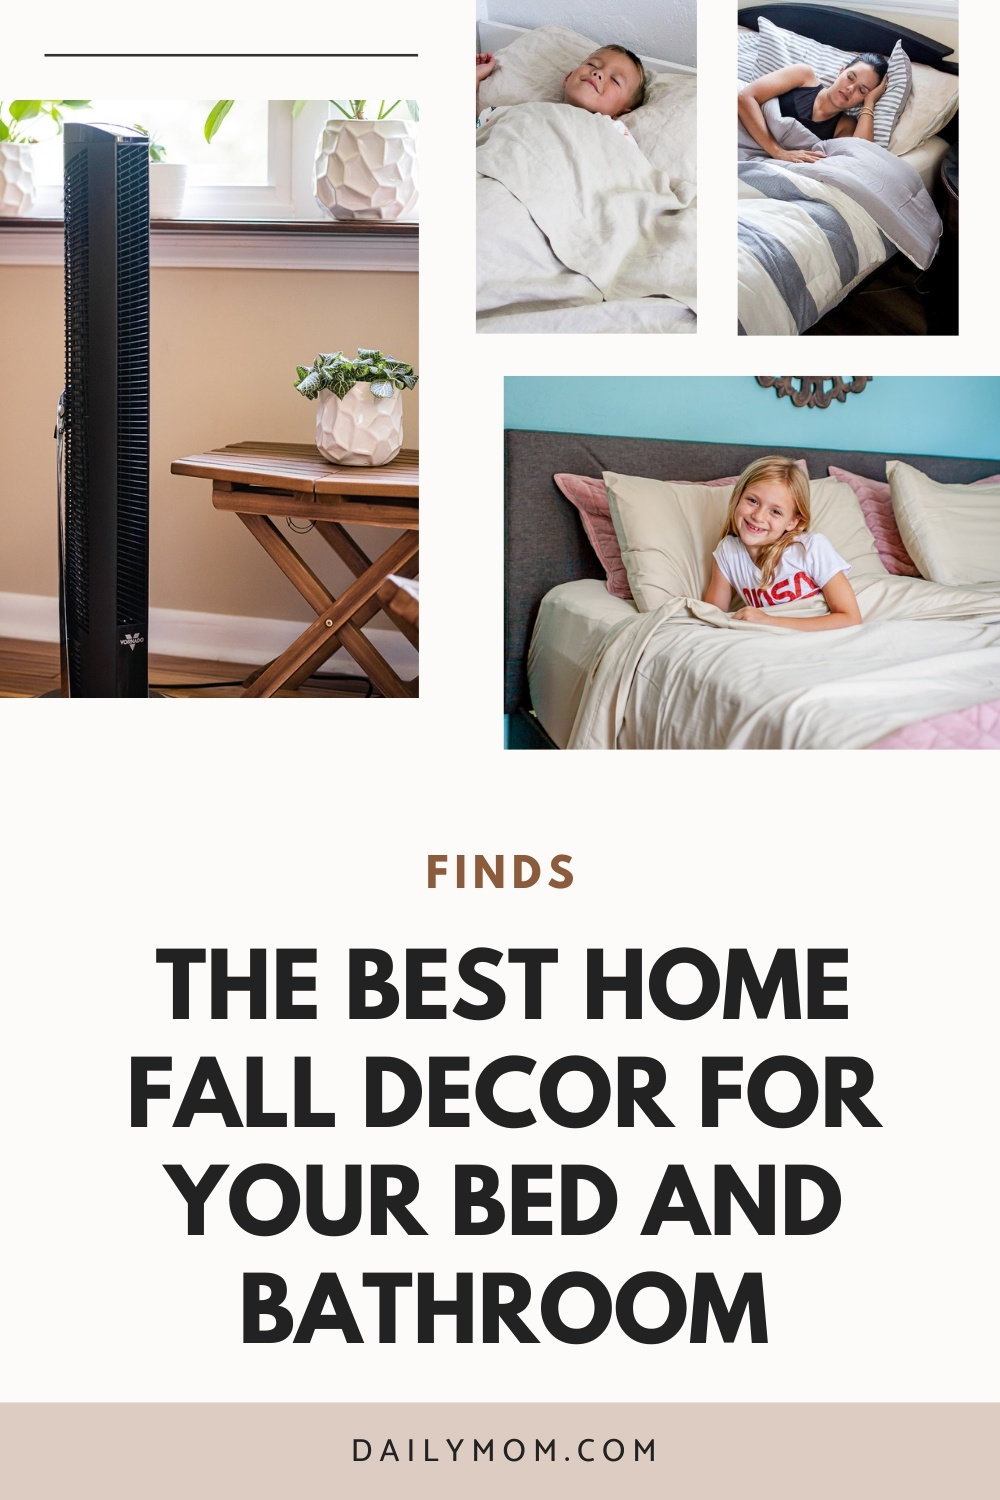 Snuggle Up This Season With The Best Cozy Fall Home Decor For Your Bed & Bath